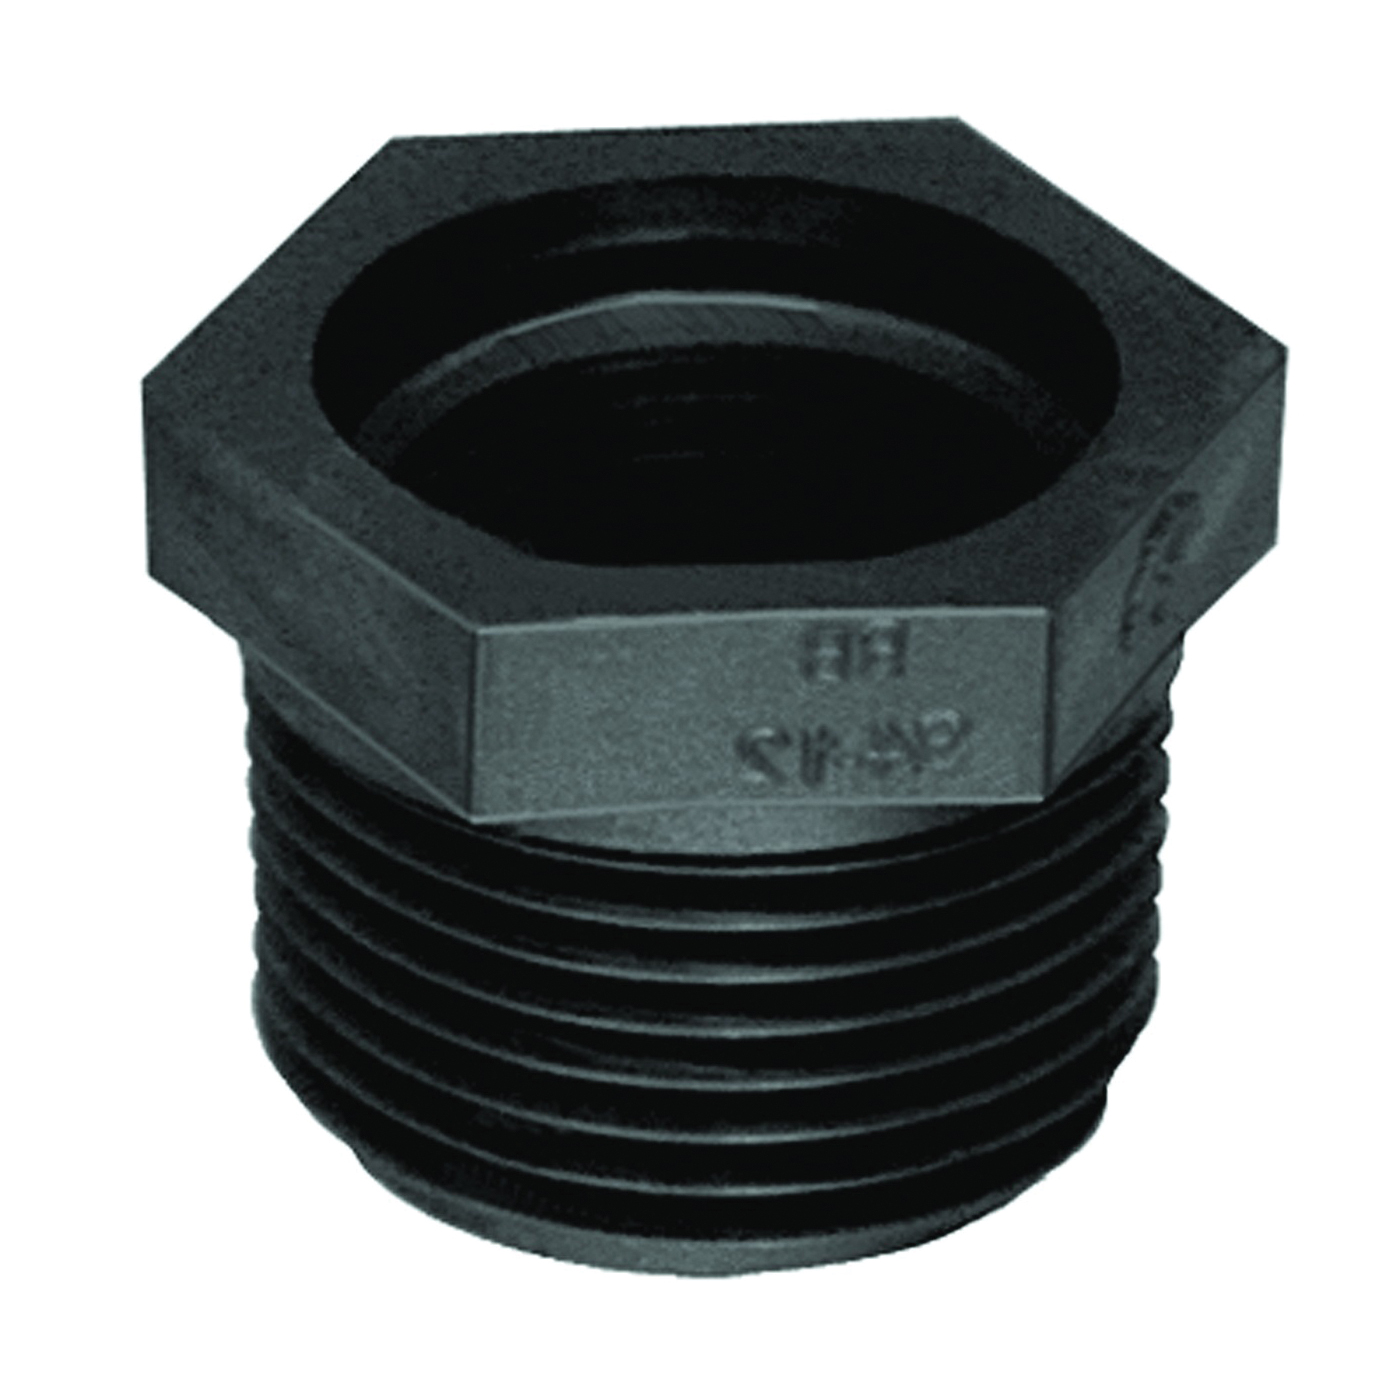 RB200-114P Reducing Pipe Bushing, 2 x 1-1/4 in, MPT x FPT, Black